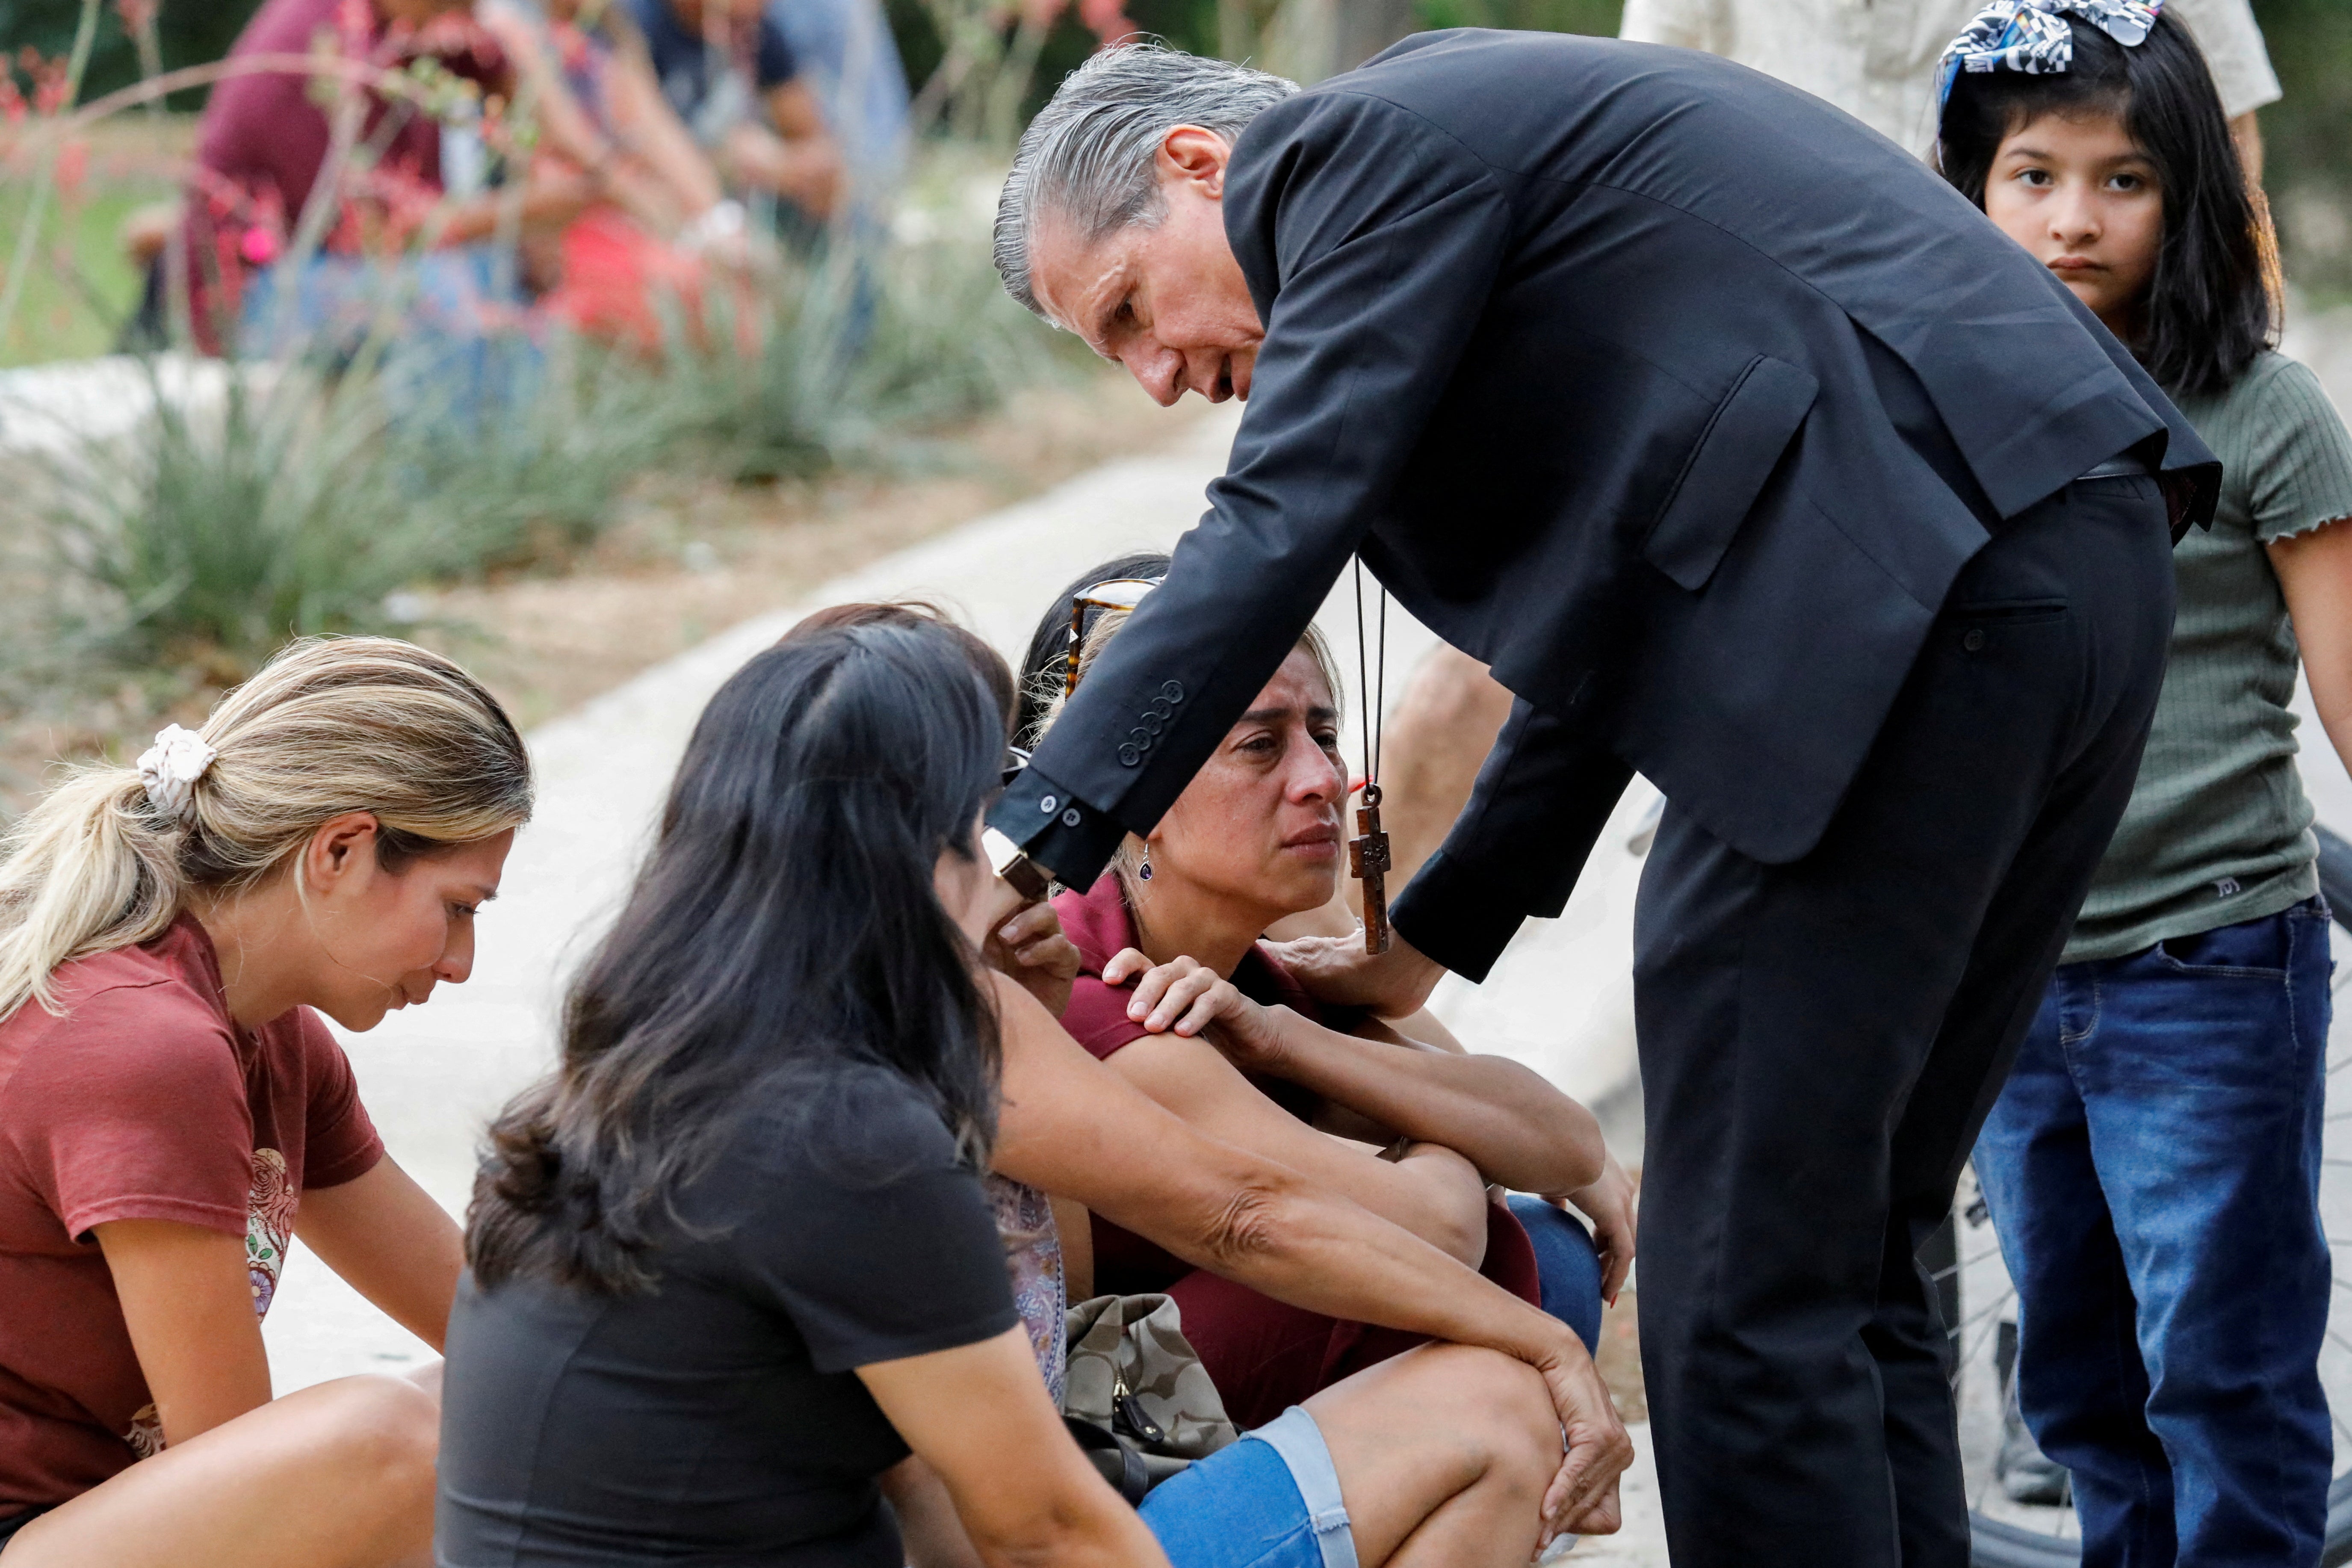 Gustavo Garcia-Siller, Archbishop of the Archdiocese of San Antonio, comforts people as they react outside the Ssgt Willie de Leon Civic Center, where students had been transported from Robb Elementary School after a shooting, in Uvalde, Texas, US on 24 May 2022